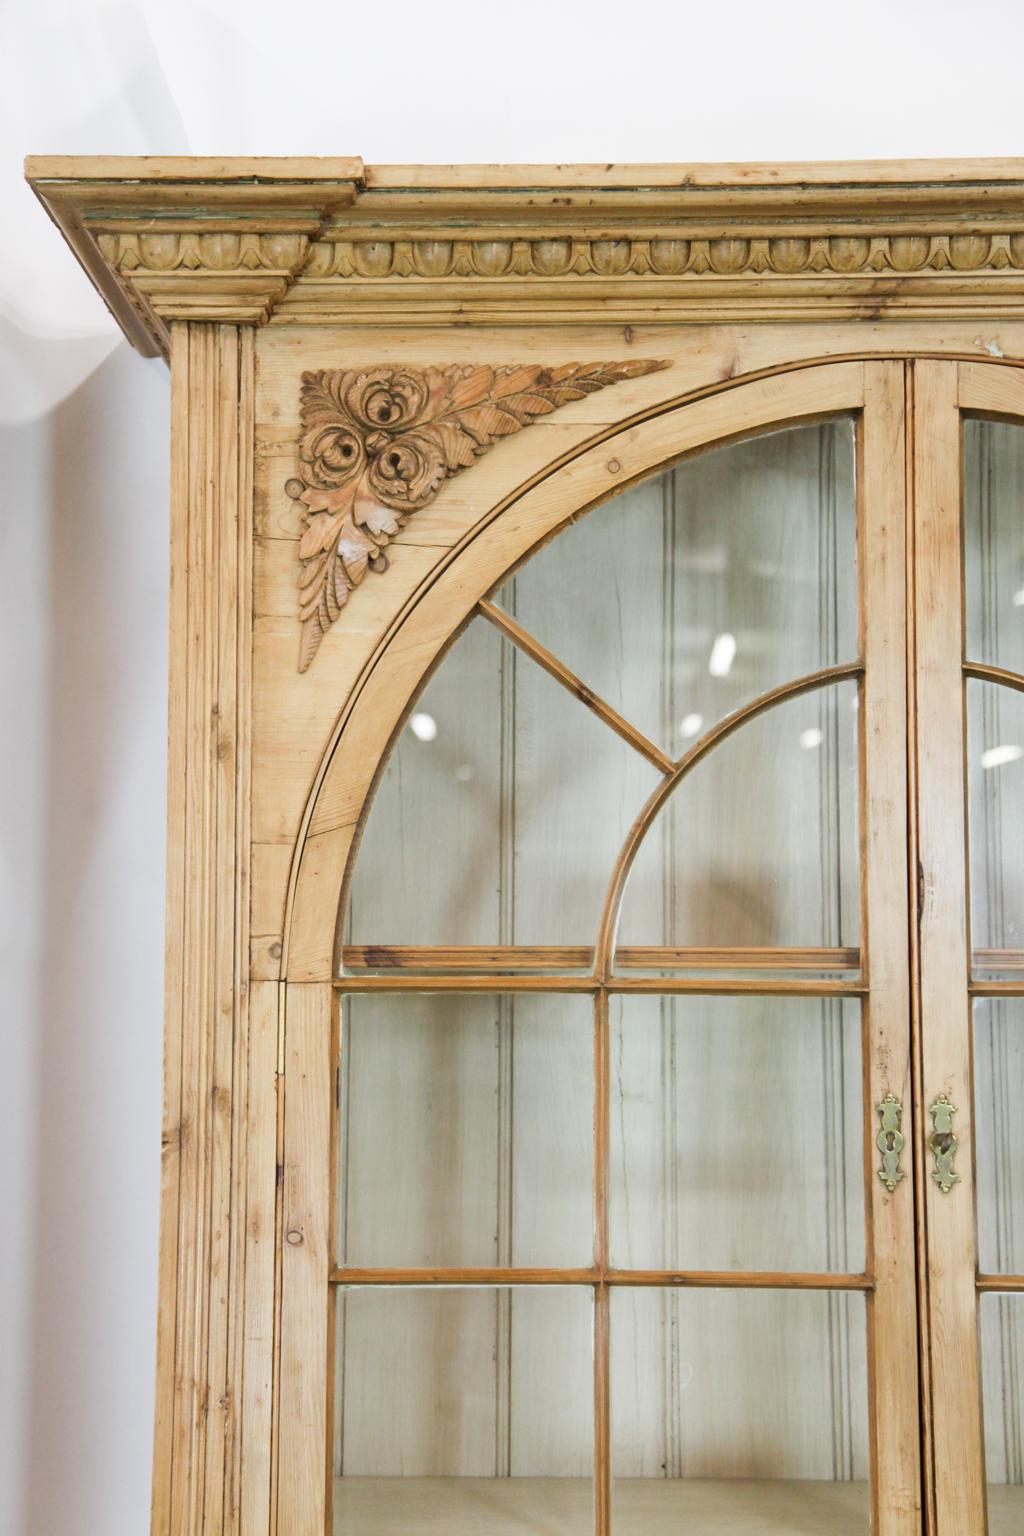 Architectural English pine breakfront, the entirety with egg and dart cornice, the outer sections with floral appliques above demilune arched glass doors, interior with adjustable shelves, two drawers above double doors below, the center section